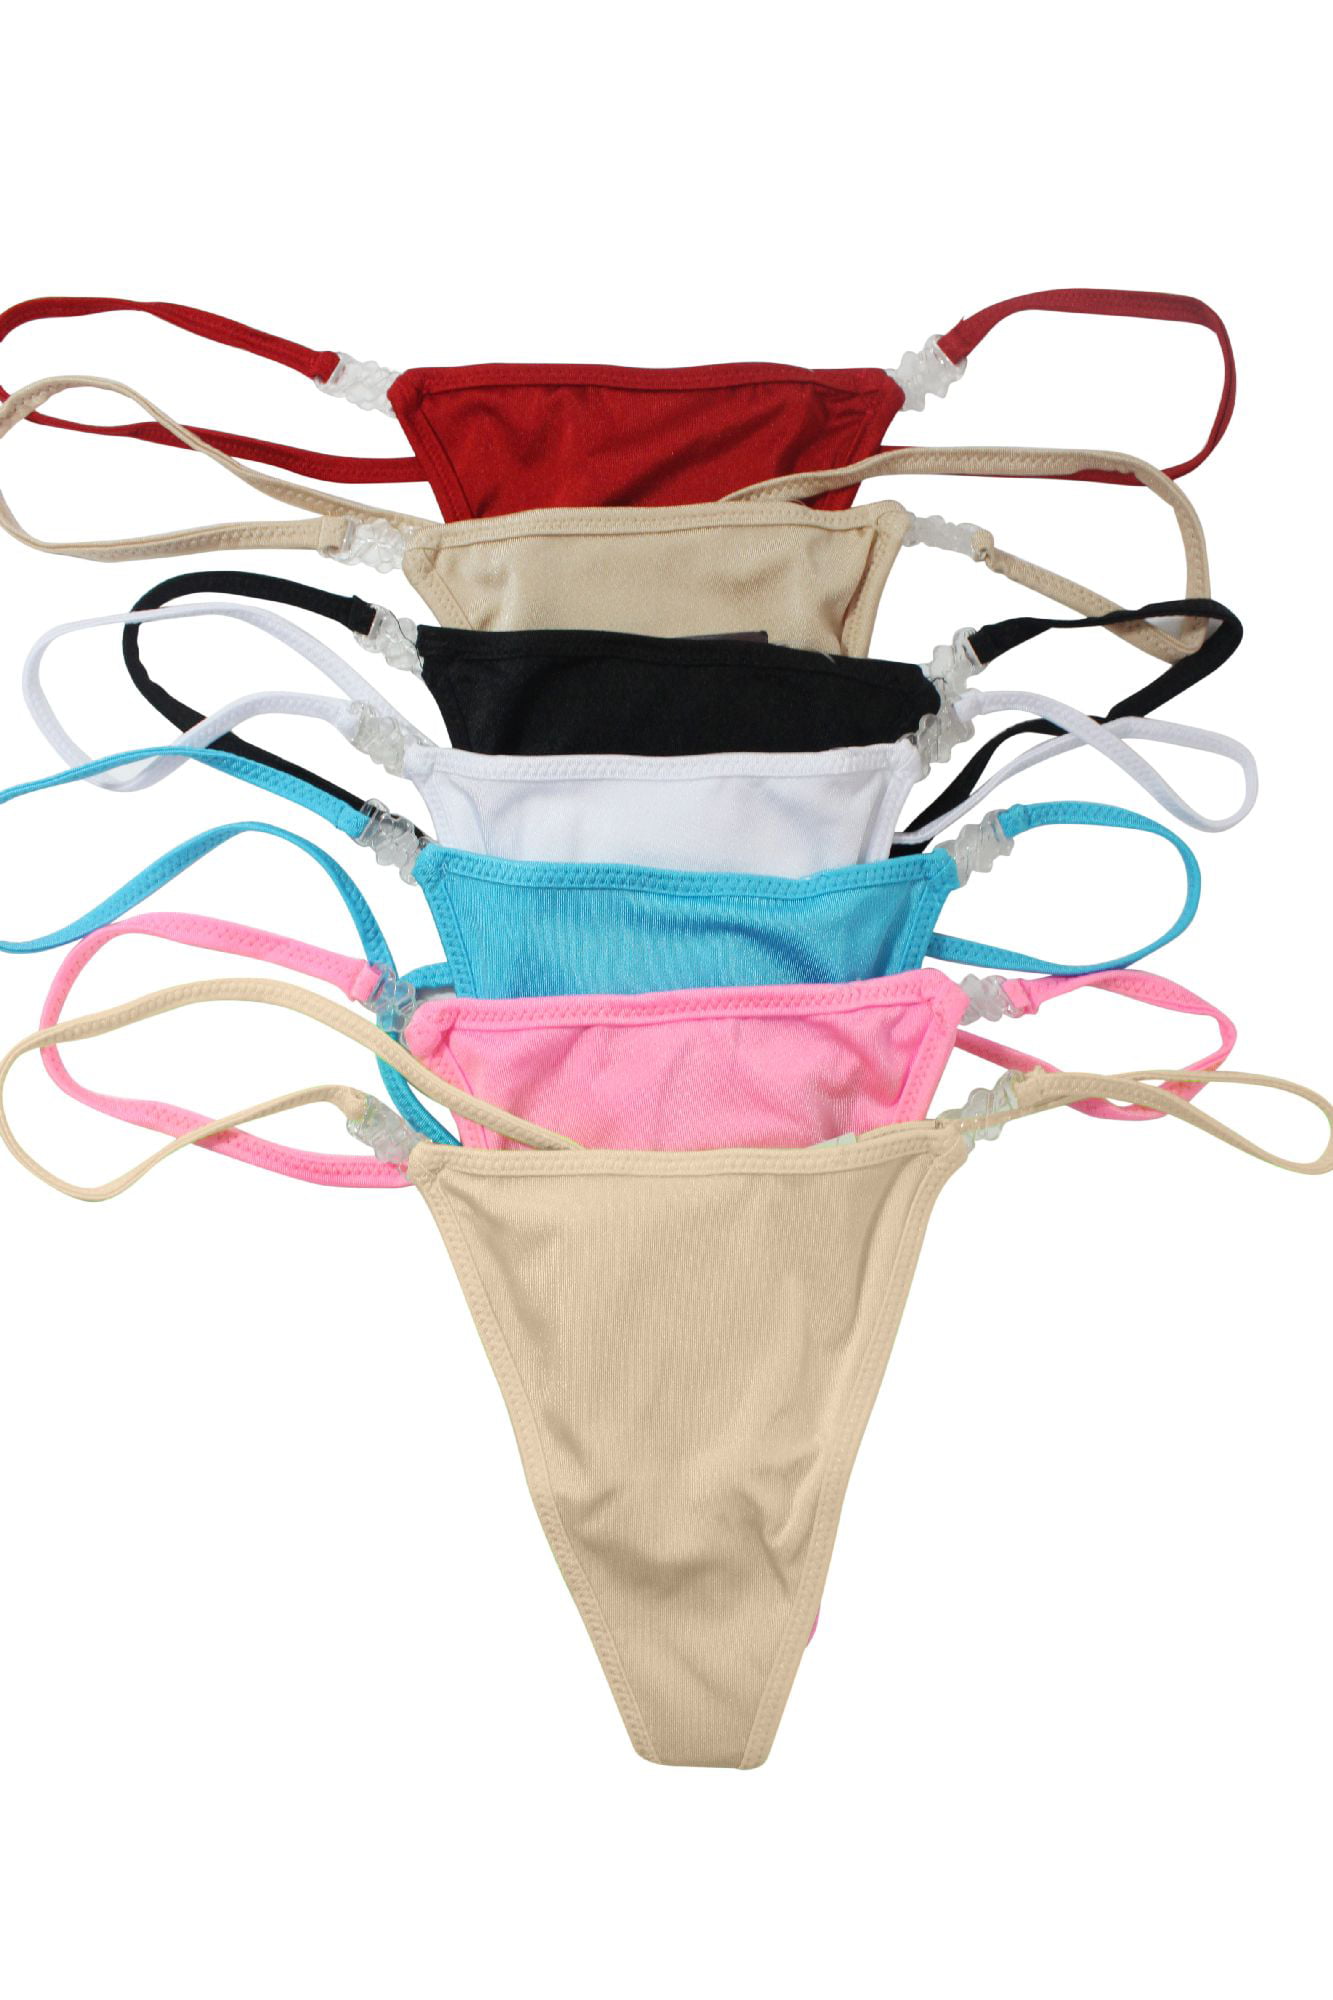 Pack Womens Sexy Mini Thong Micro G String Underwear Panties Lingerie My Xxx Hot Girl